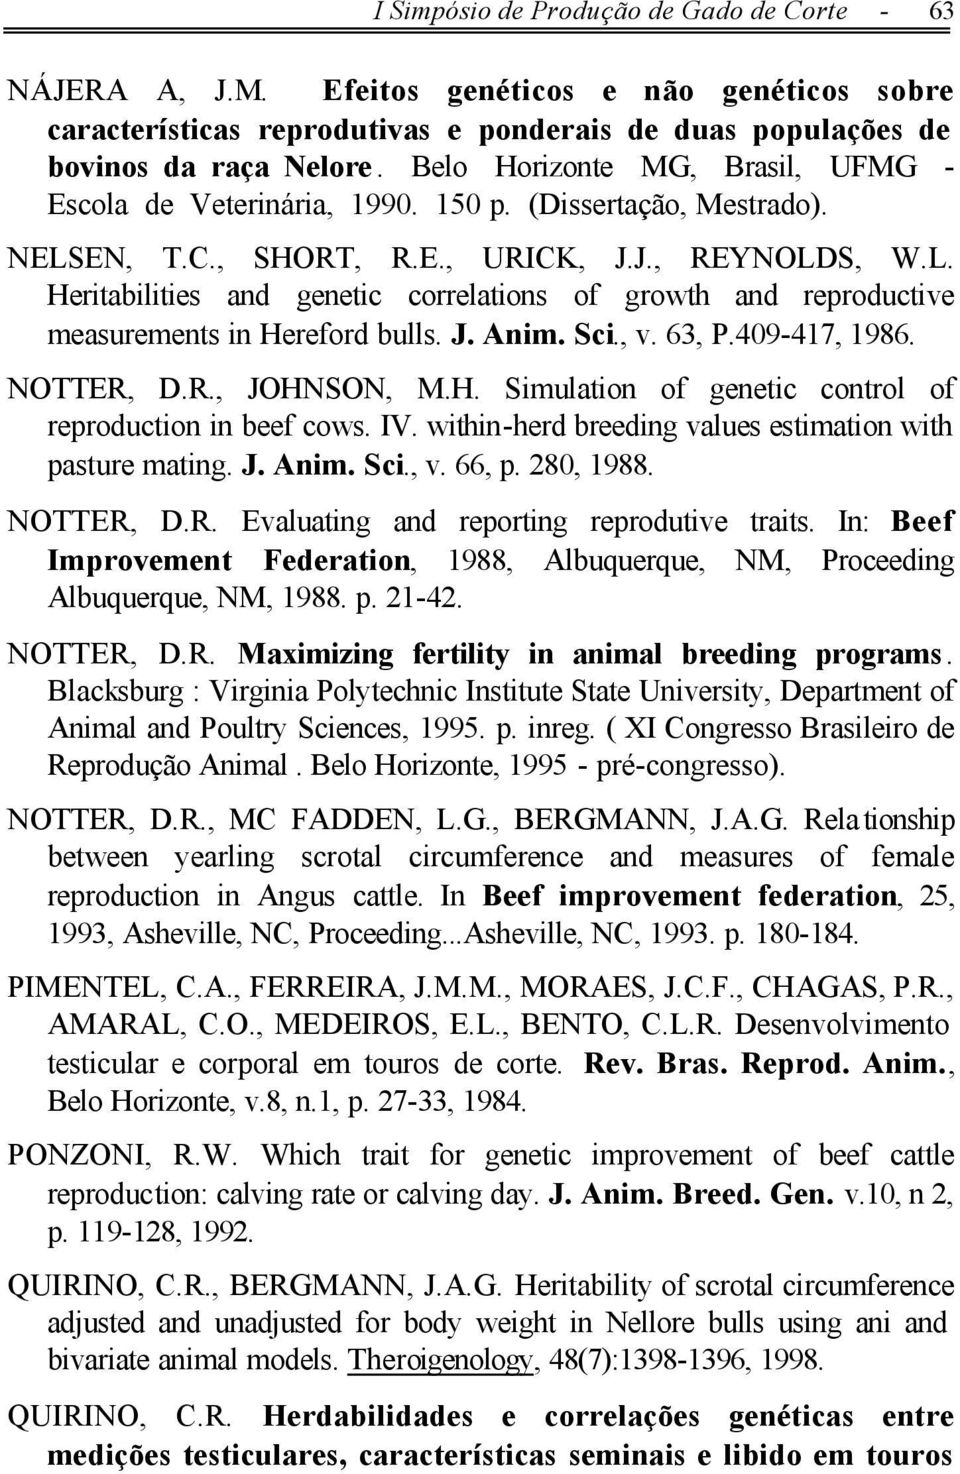 J. Anim. Sci., v. 63, P.409-417, 1986. NOTTER, D.R., JOHNSON, M.H. Simulation of genetic control of reproduction in beef cows. IV. within-herd breeding values estimation with pasture mating. J. Anim. Sci., v. 66, p.